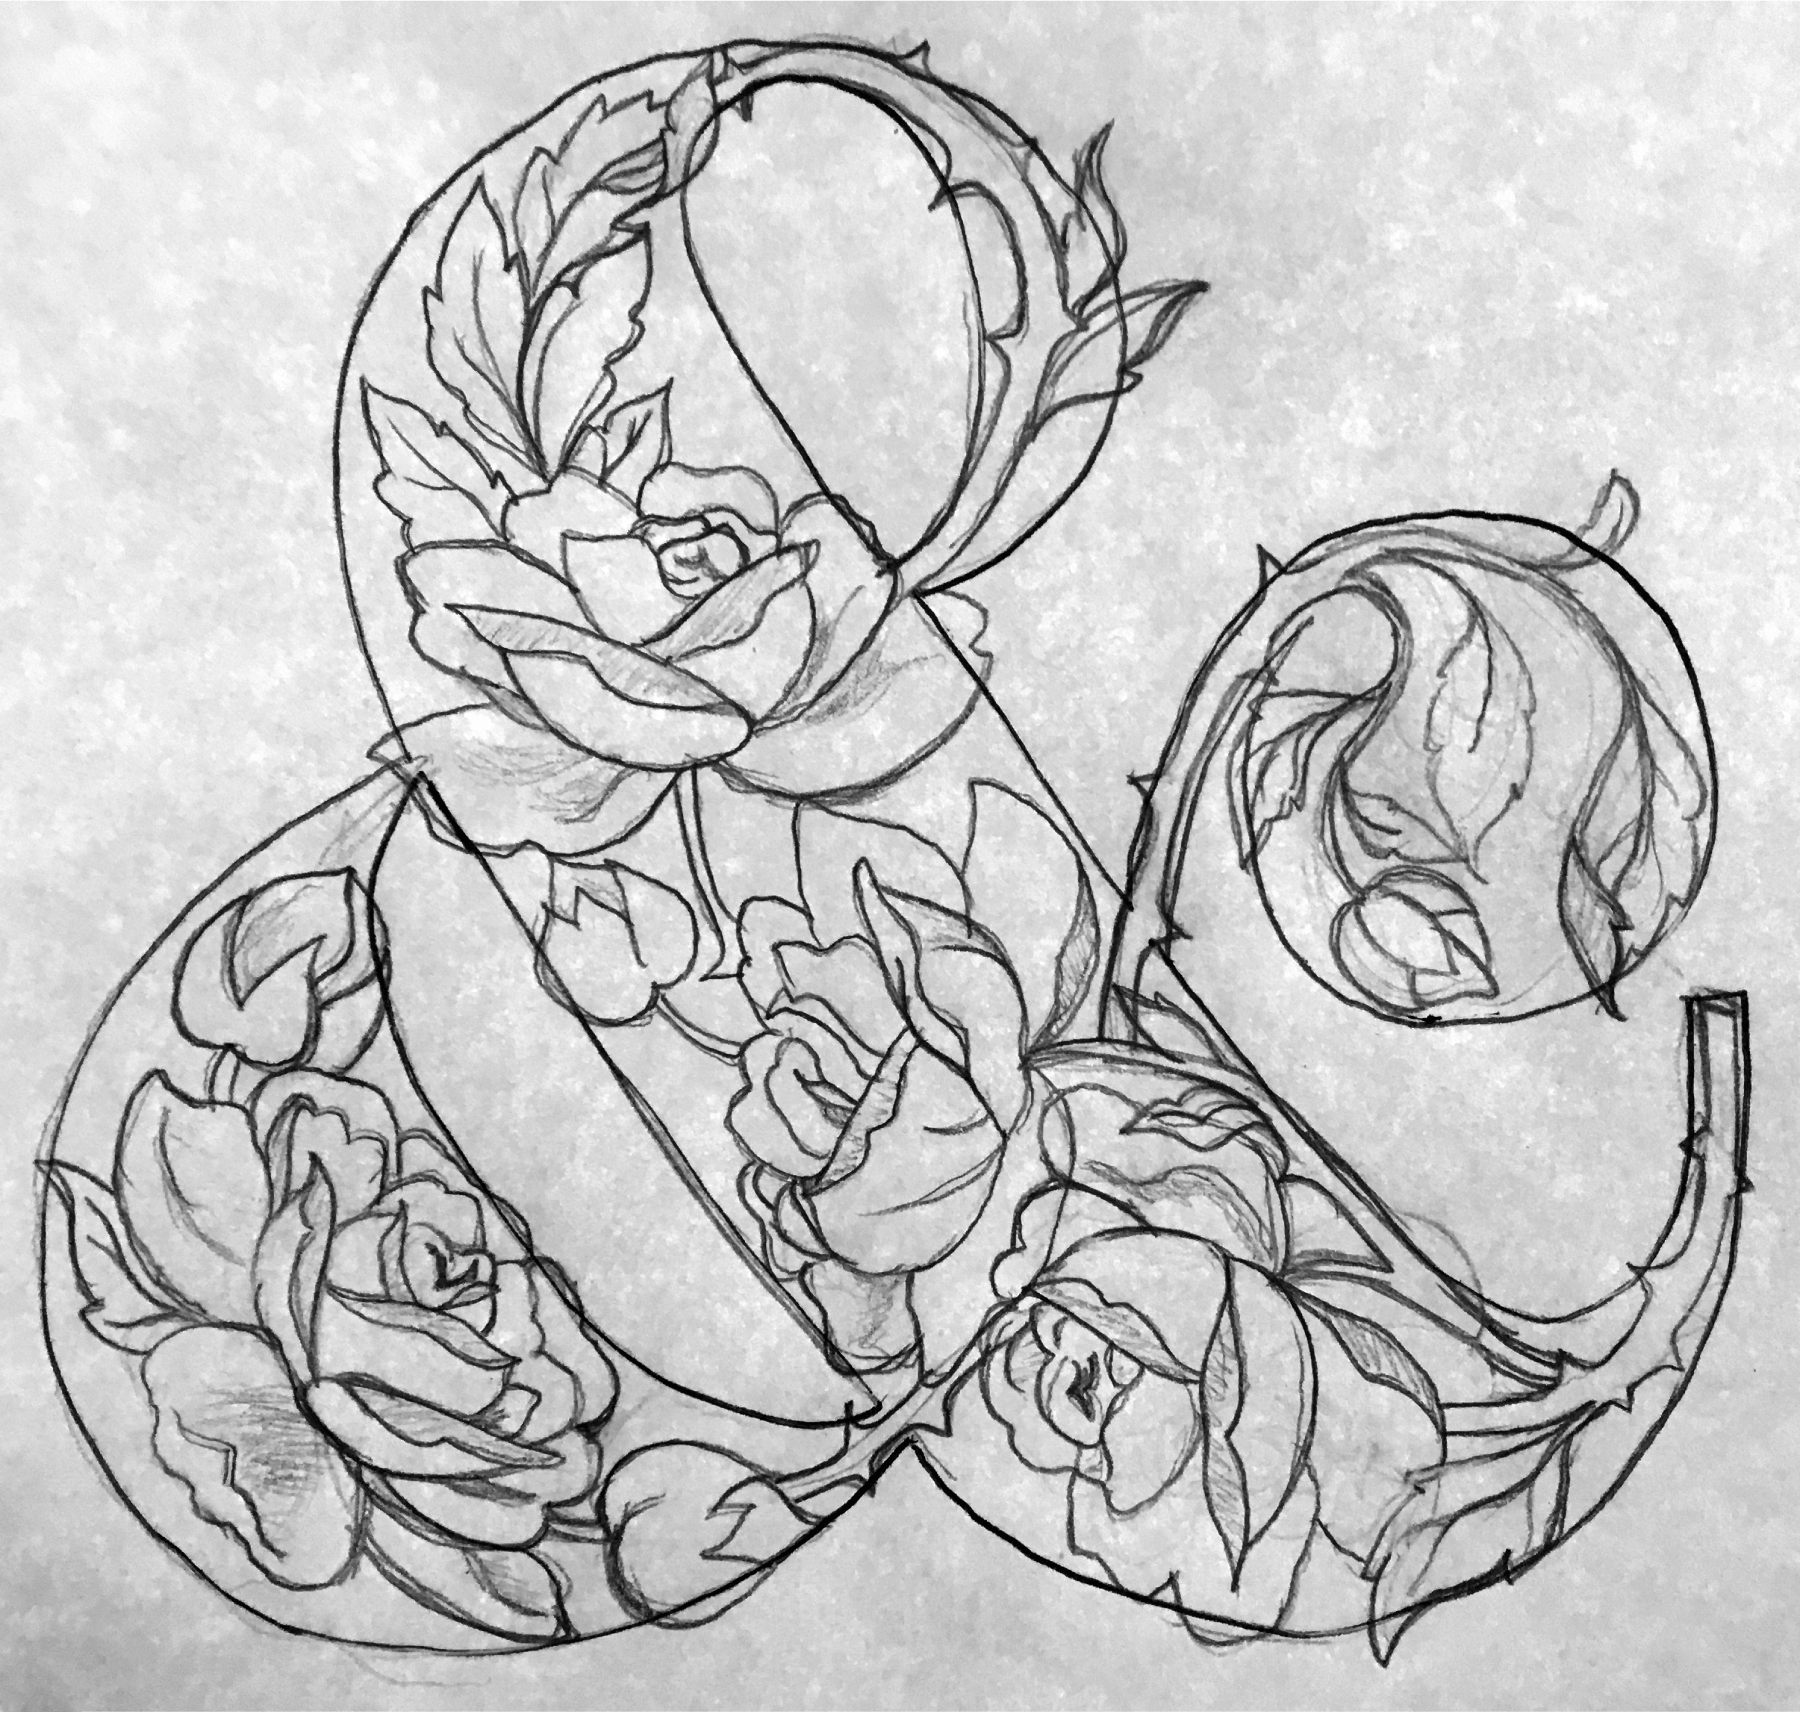 This is a sketch of the floral ampersand I created.